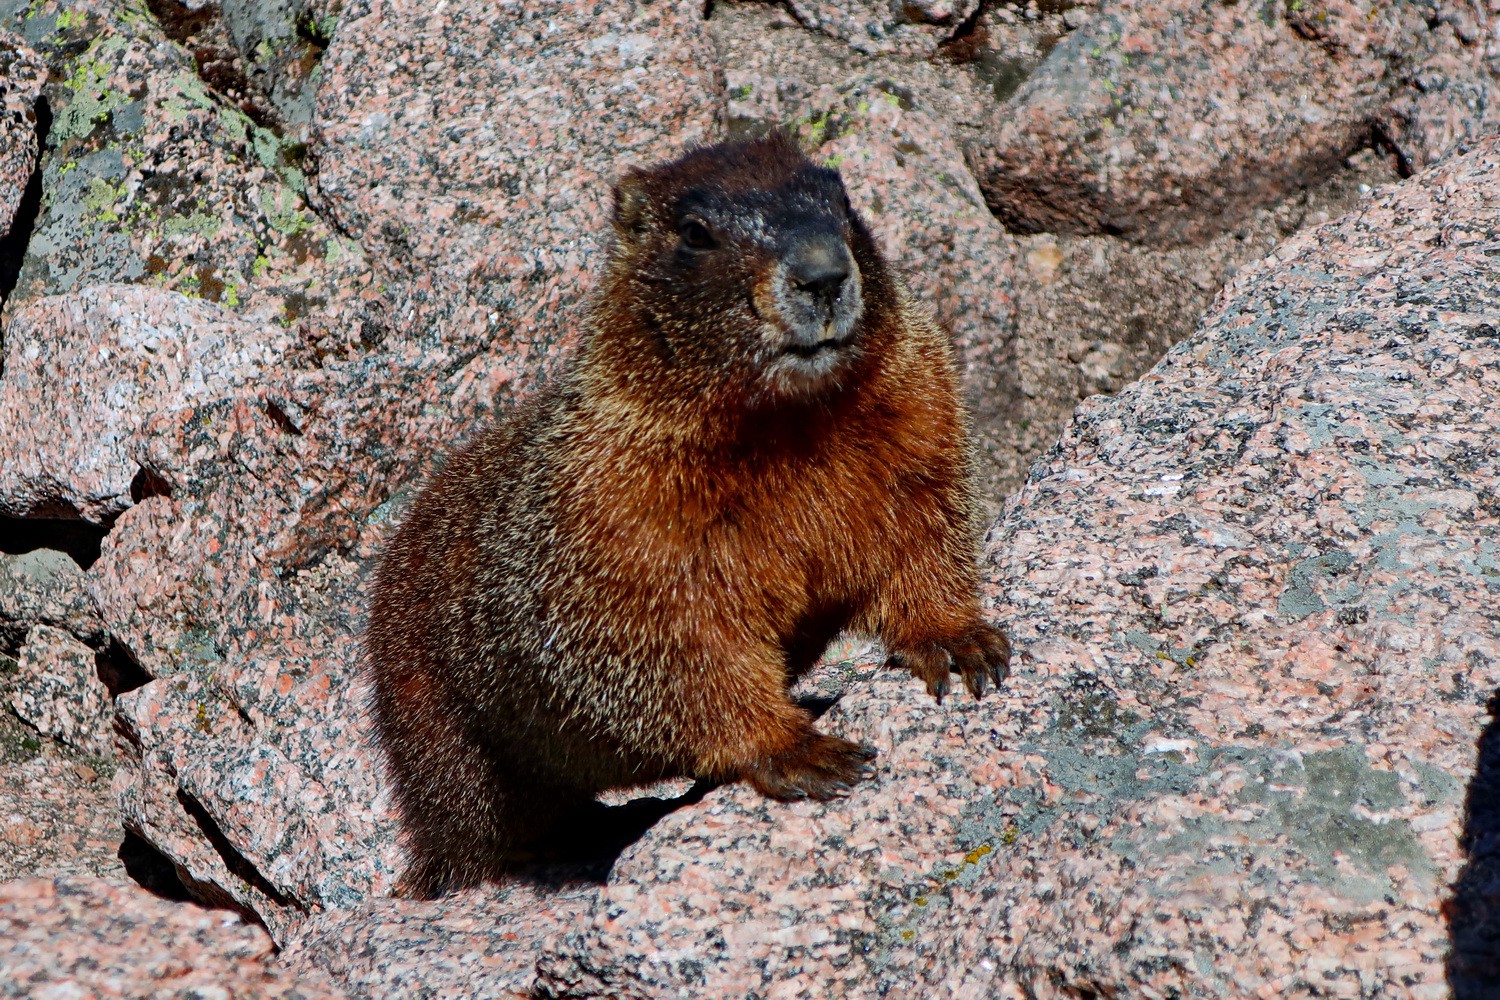 Not really - Marmot is watching